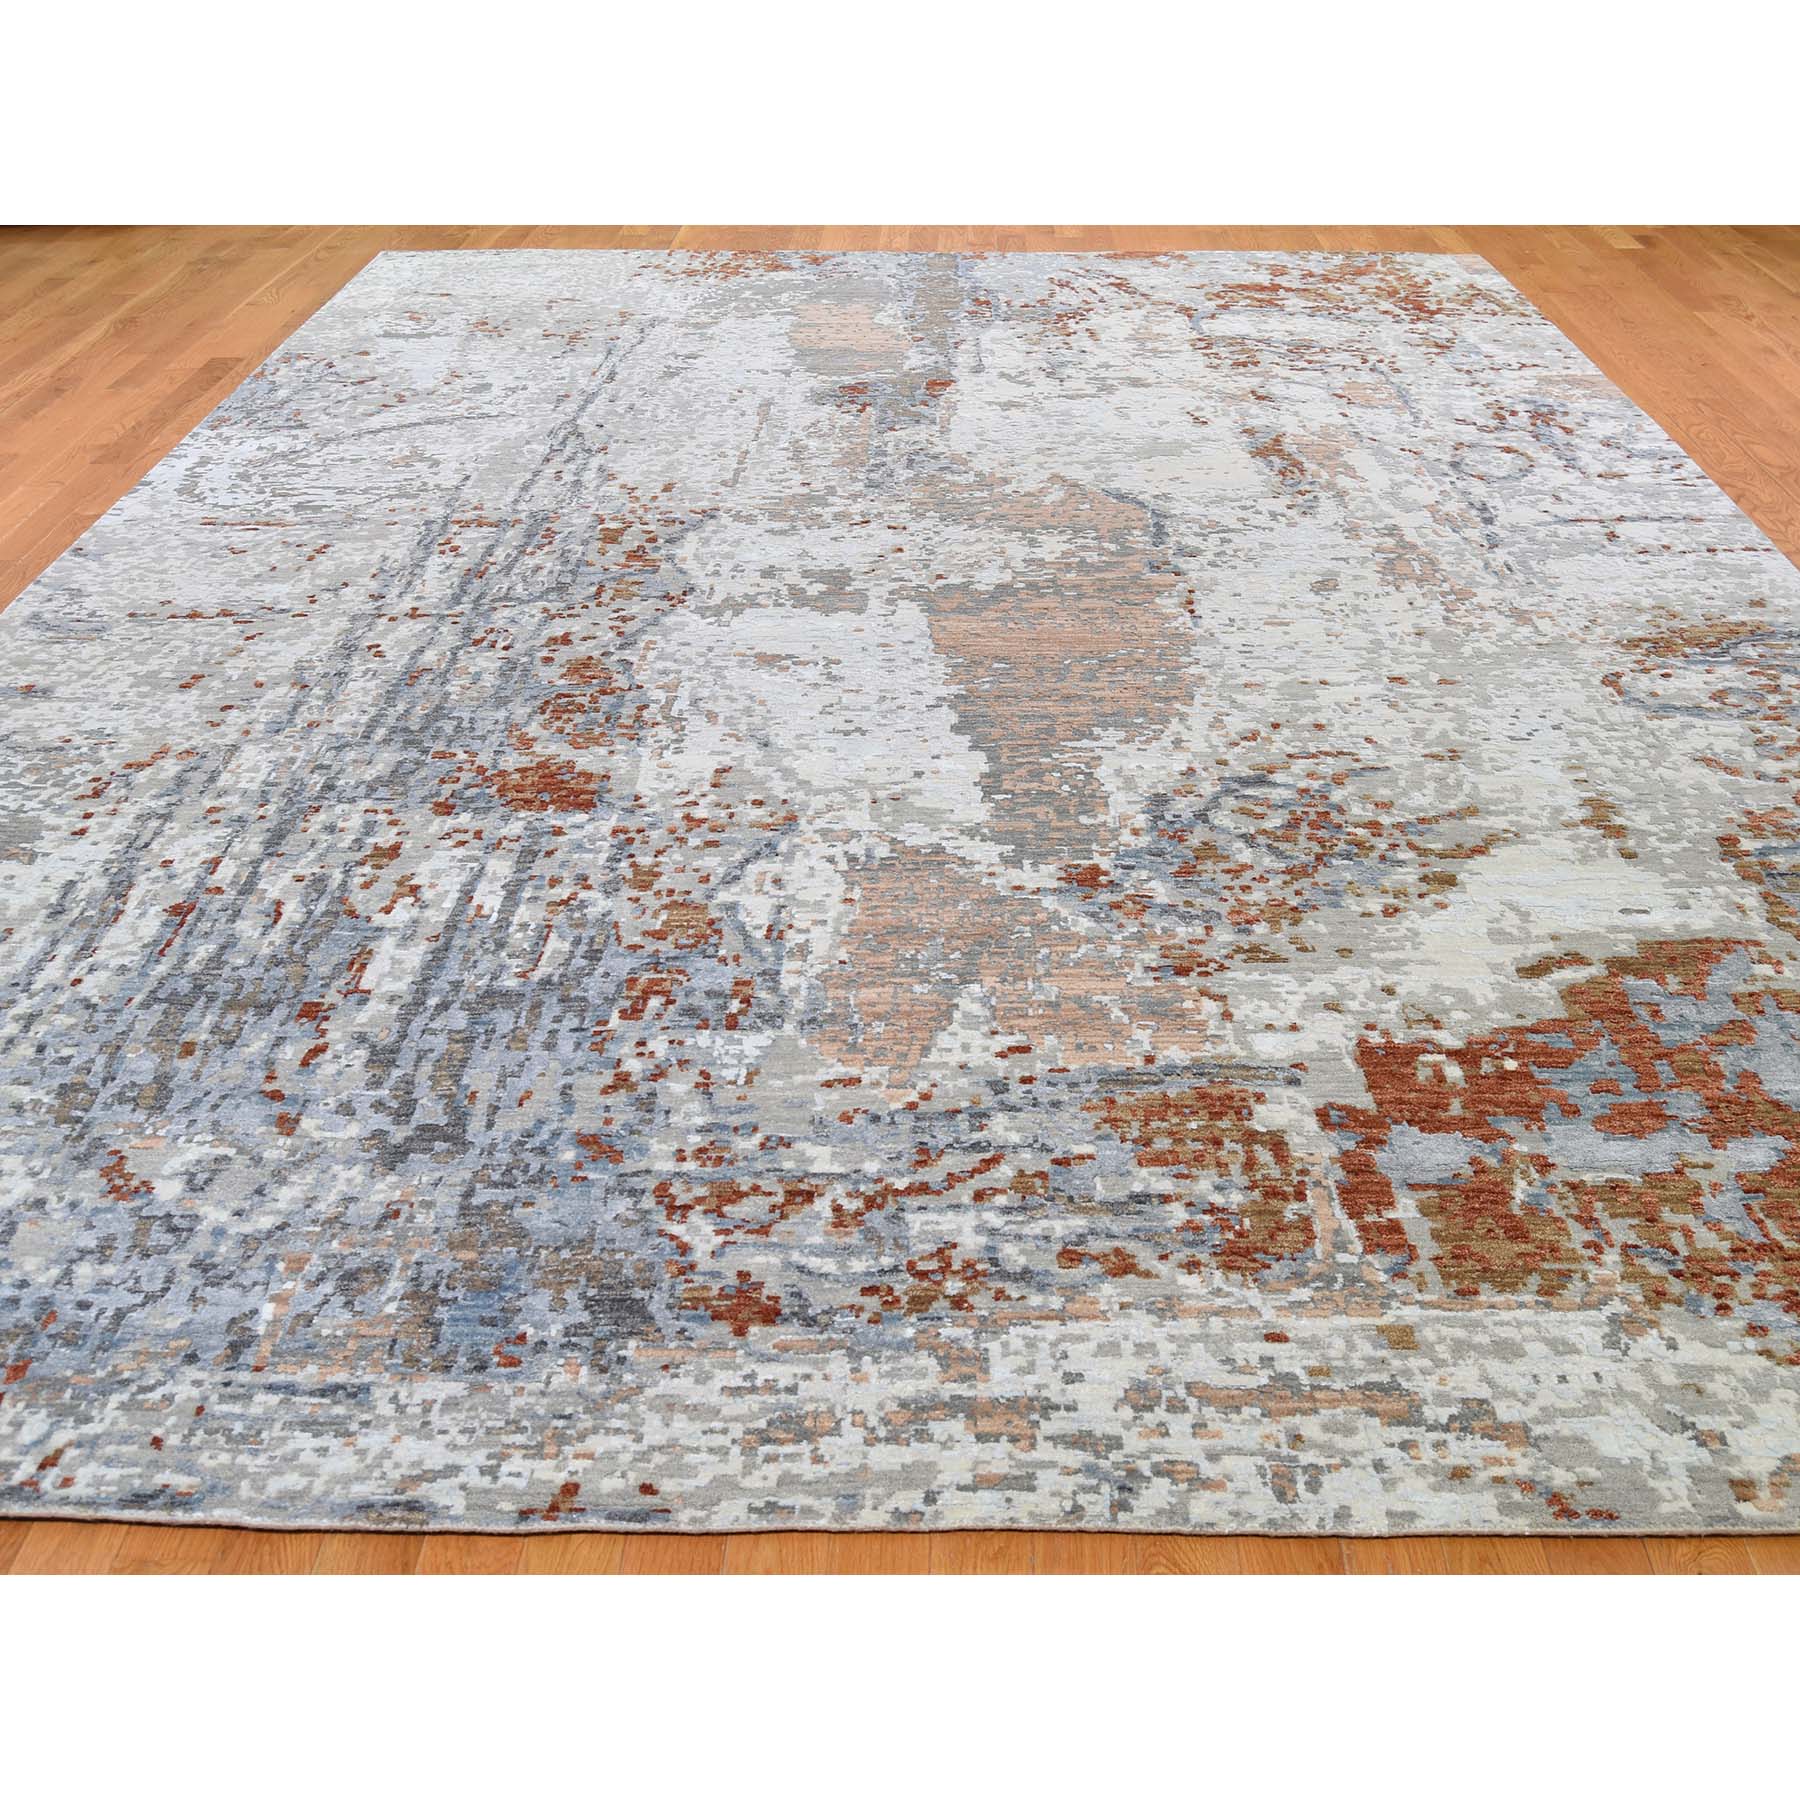 10-x13-10  Silver Hi-Low Pile Abstract Design Wool And Silk Hand-Knotted Oriental Rug 